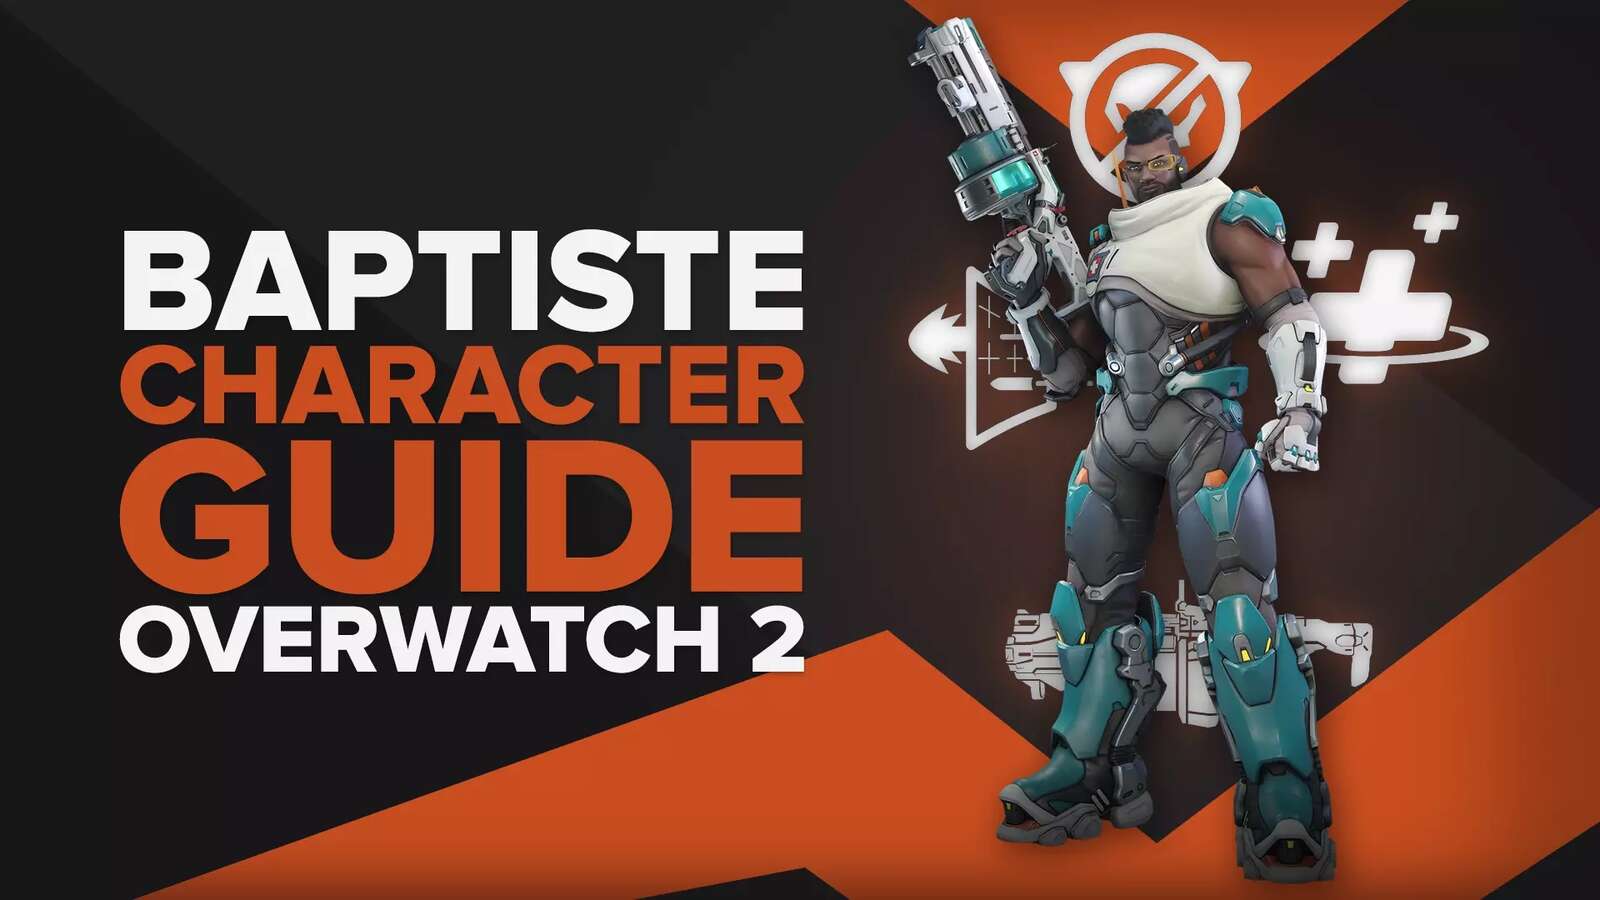 How To Play Baptiste in Overwatch 2 [Abilities, Tips & More]